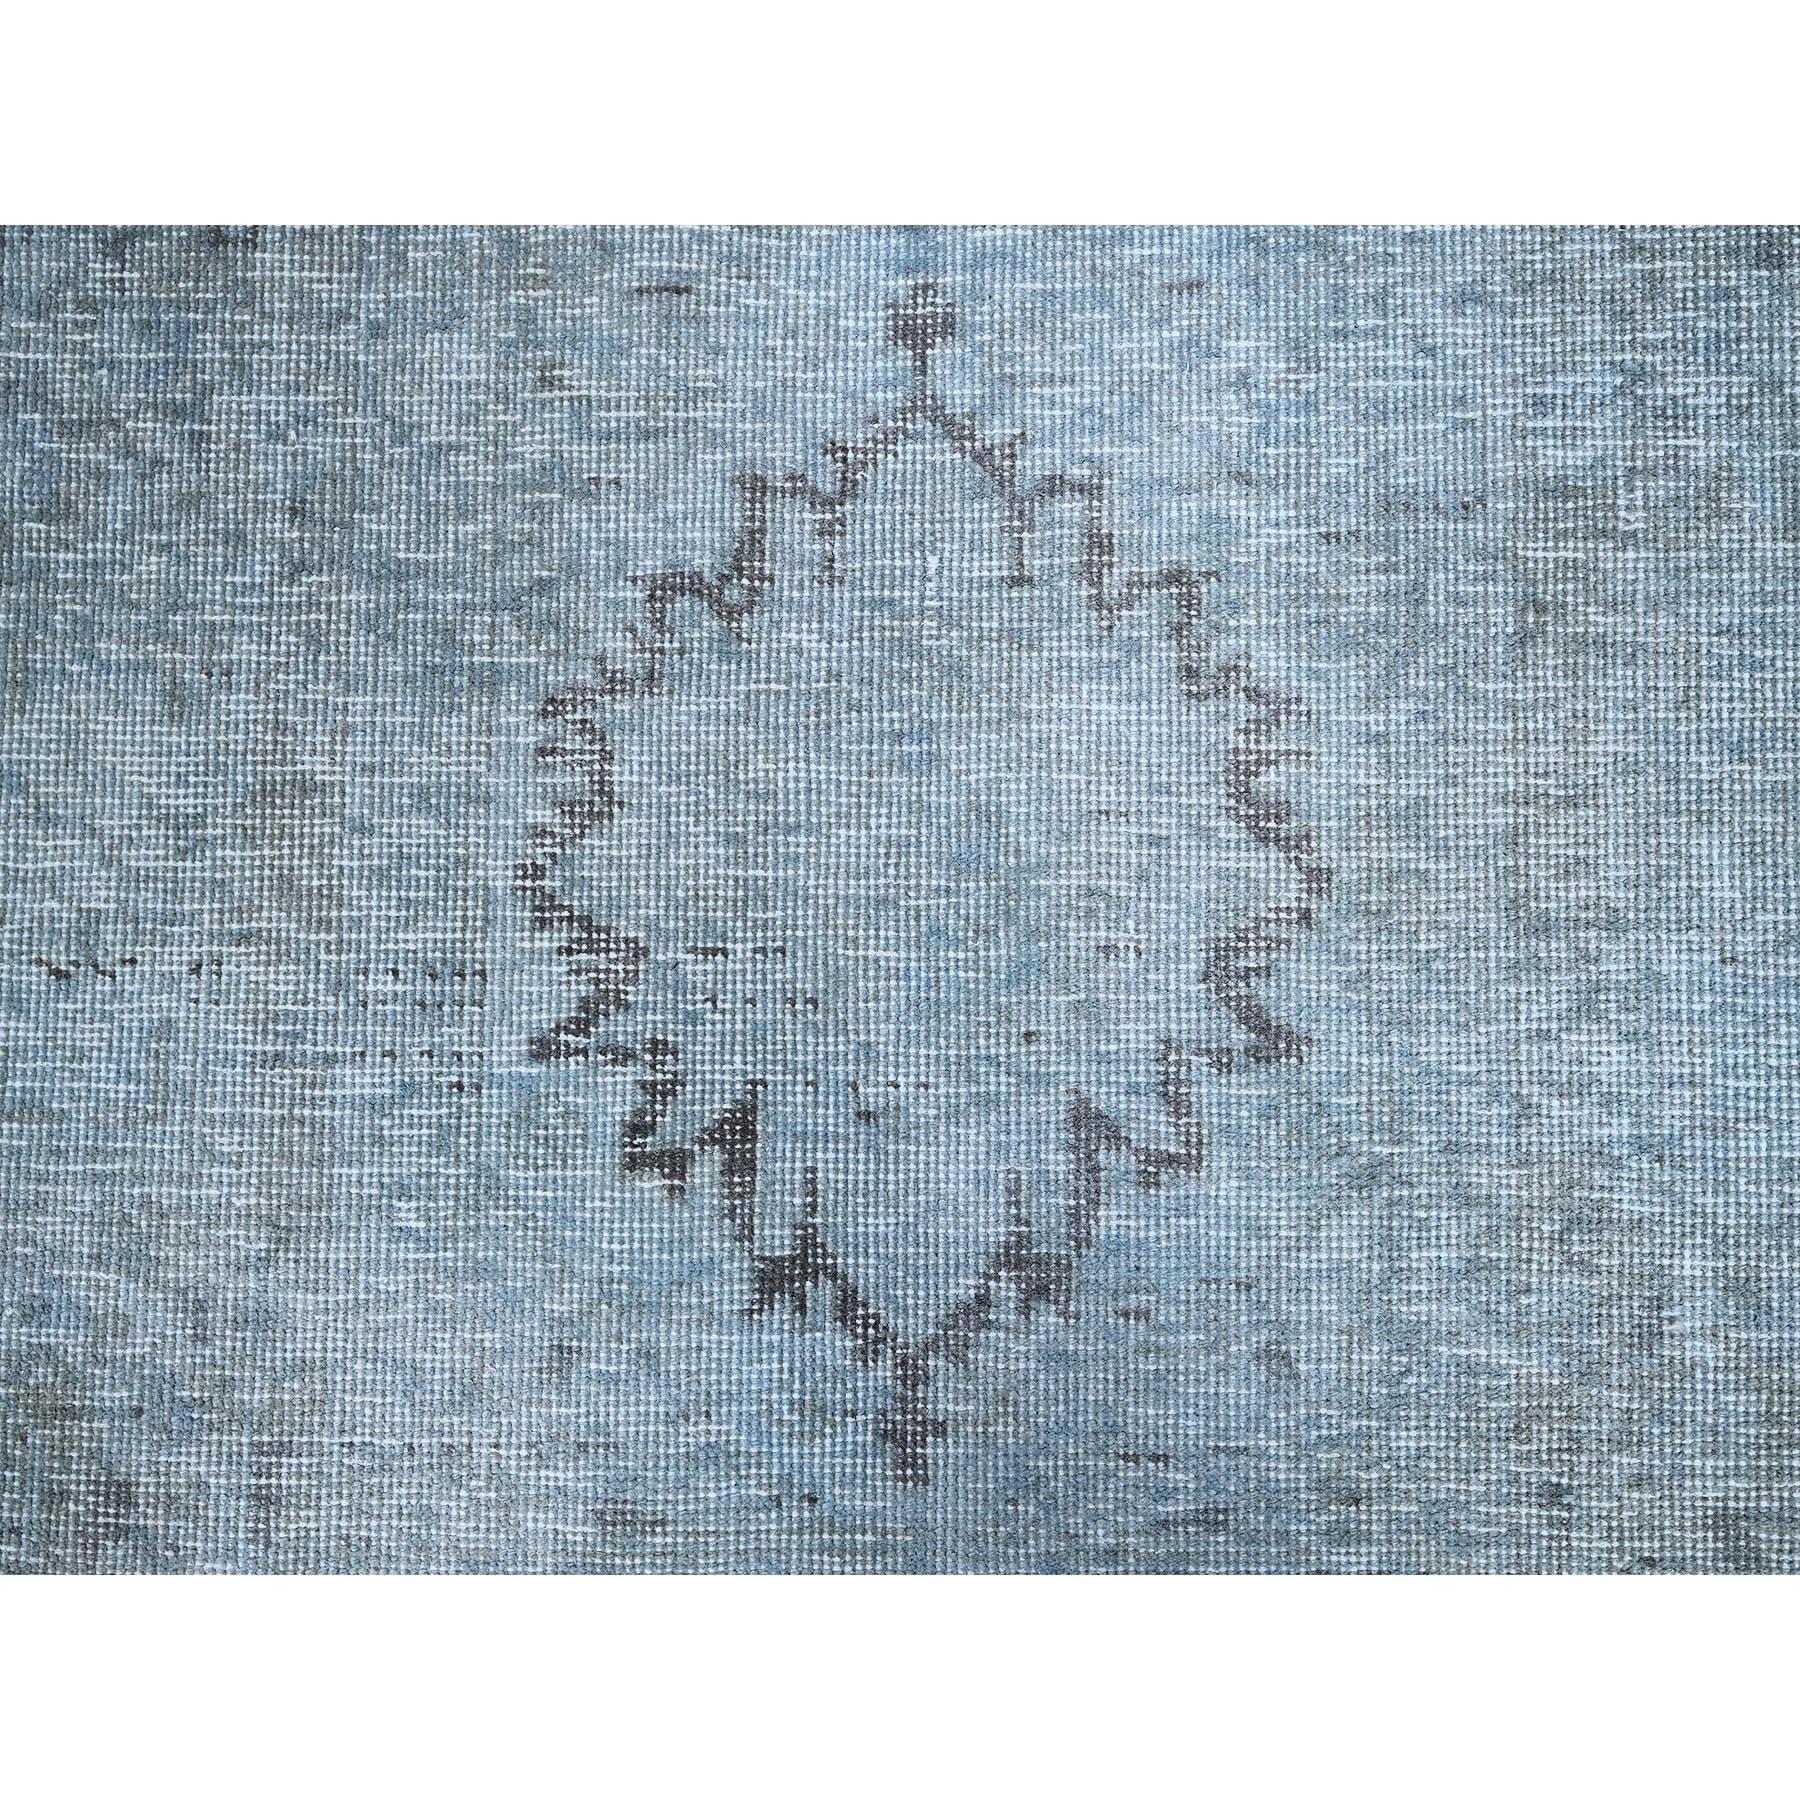 Light Turquoise Overdyed Old Persian Tabriz Rustic Feel Wool Hand Knotted Rug 4